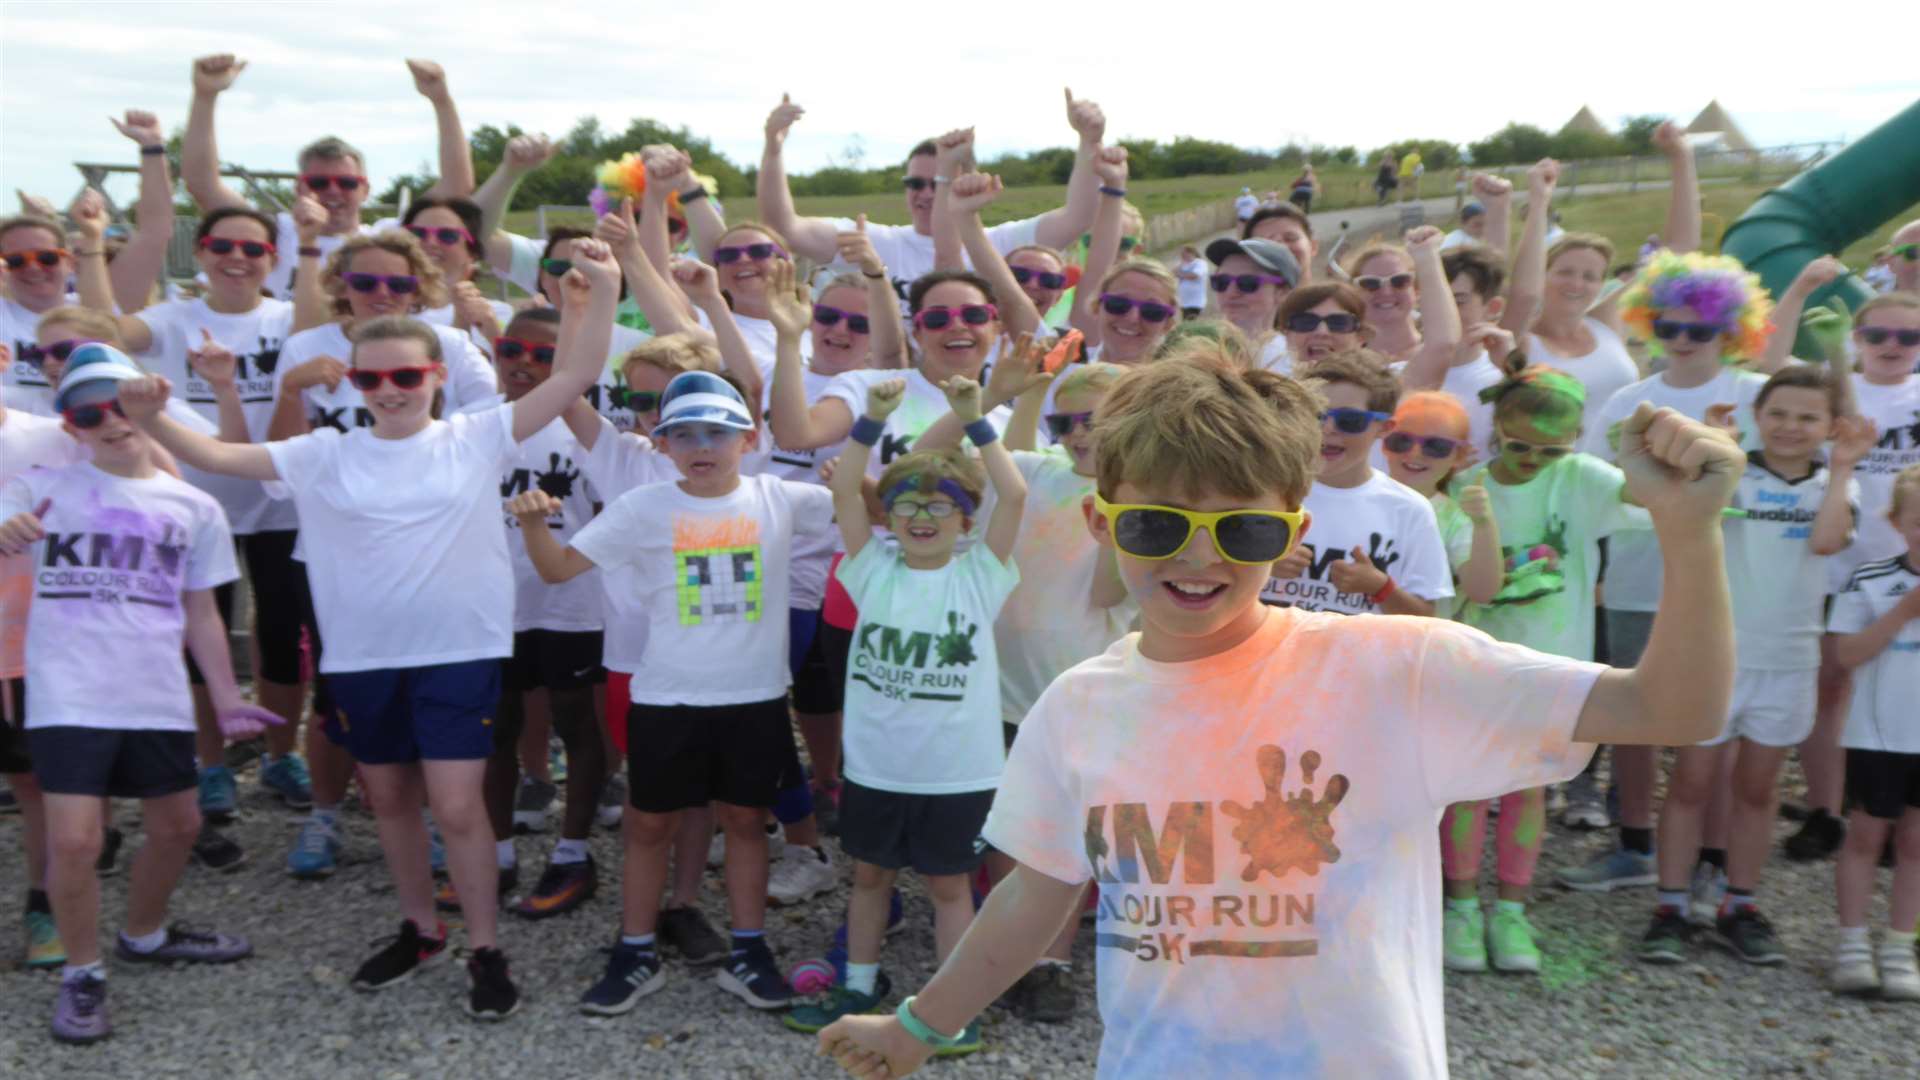 Joseph, 12, and team from St Mary's Catholic Primary, Whitstable raised funds at the KM Colour Run for an all-purpose field for the school.